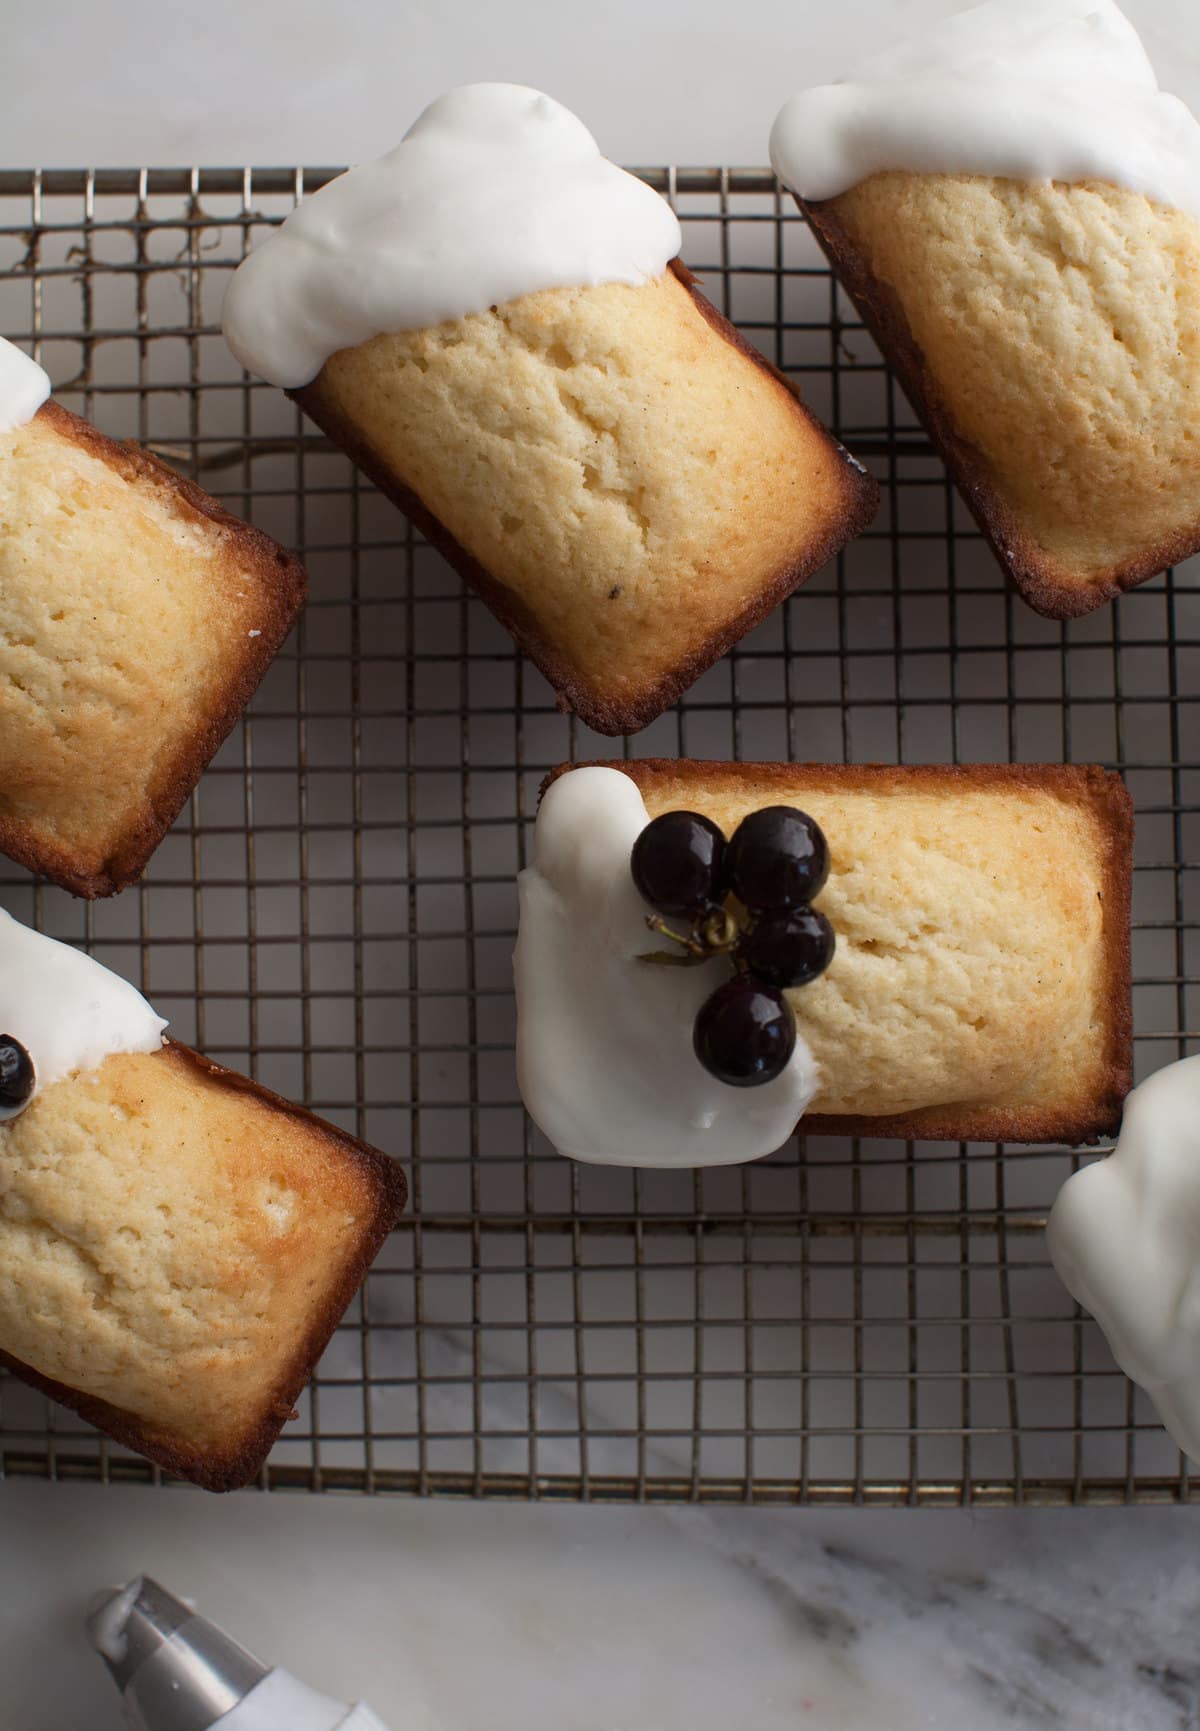 Mini Pound Cakes with Lebneh Frosting and Roasted Grapes